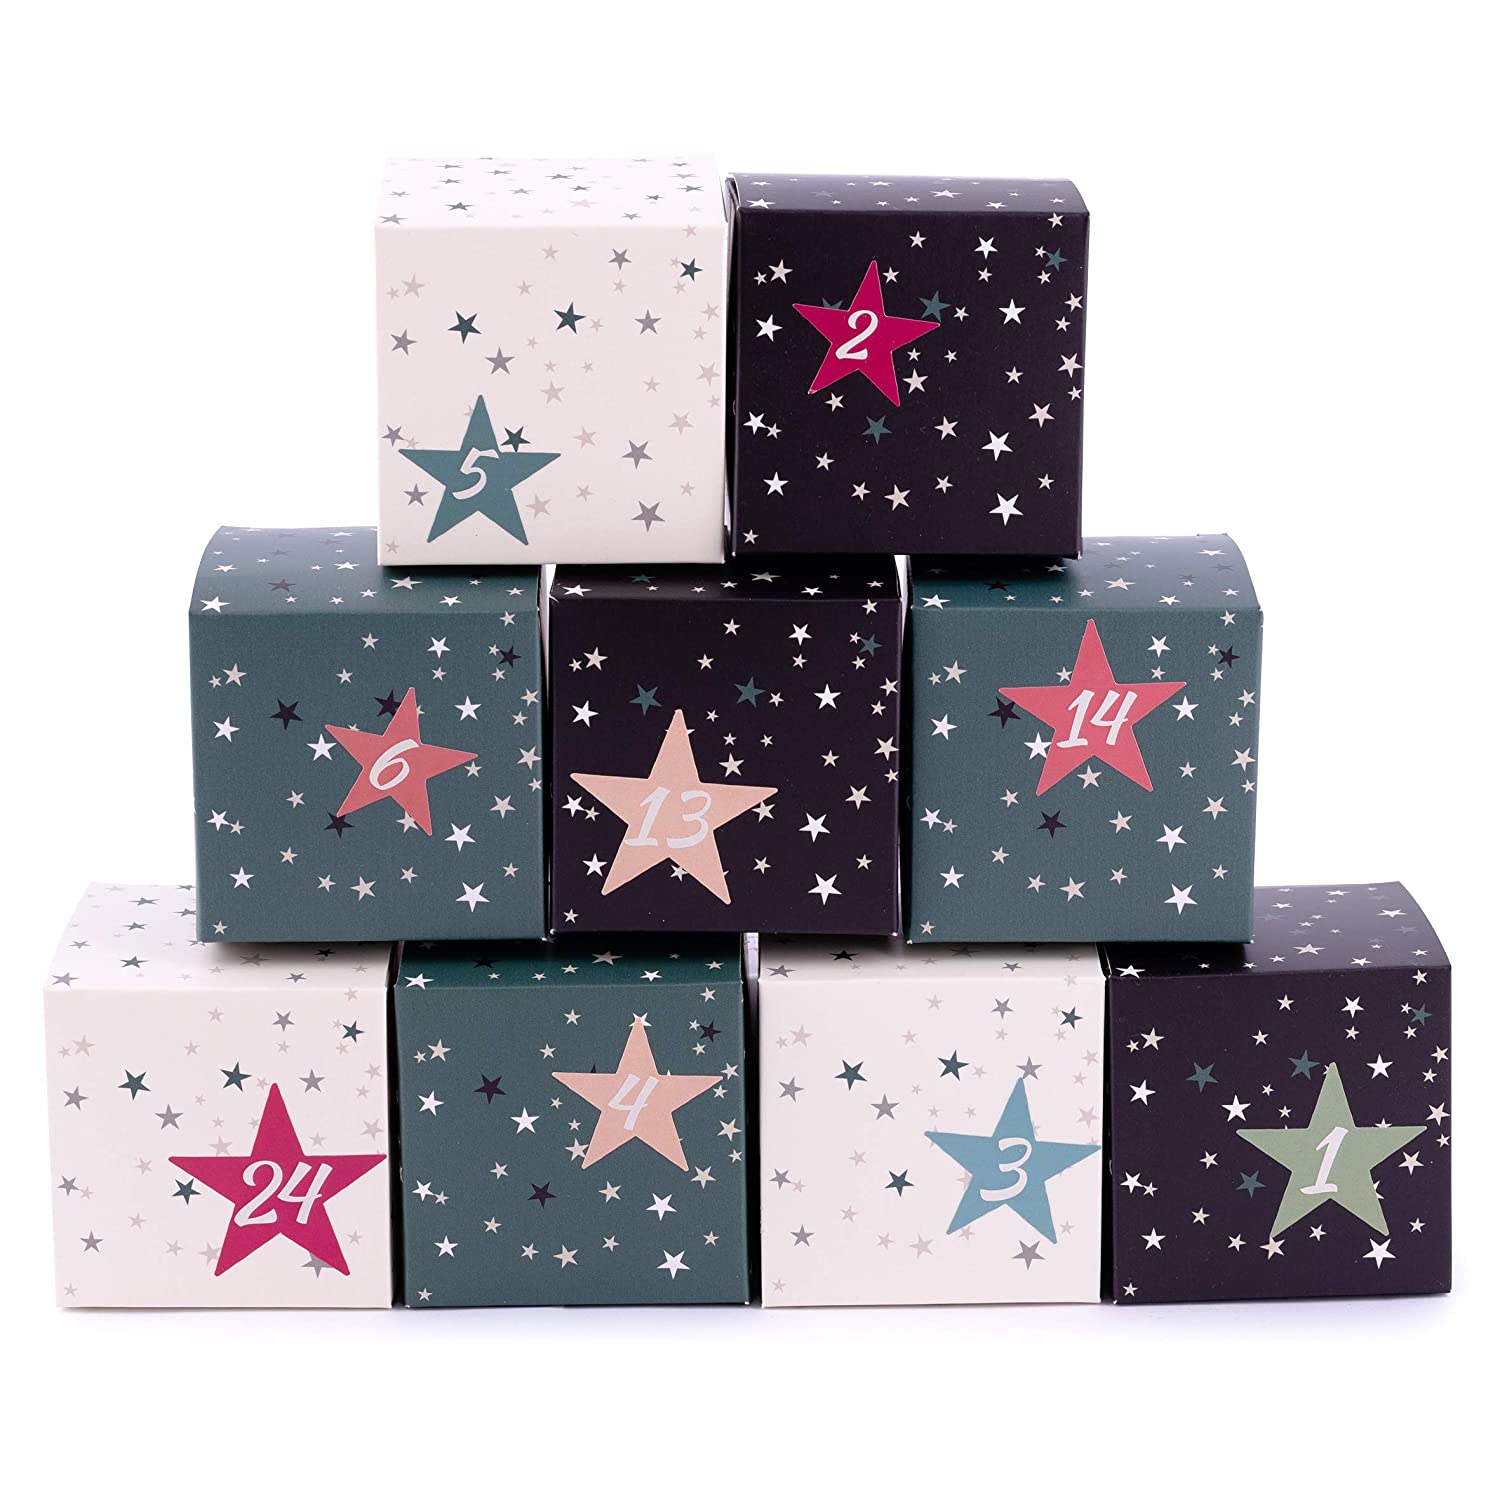 pajoma Advent Calendar Boxes, 24 Boxes for Filling, incl. Stickers star